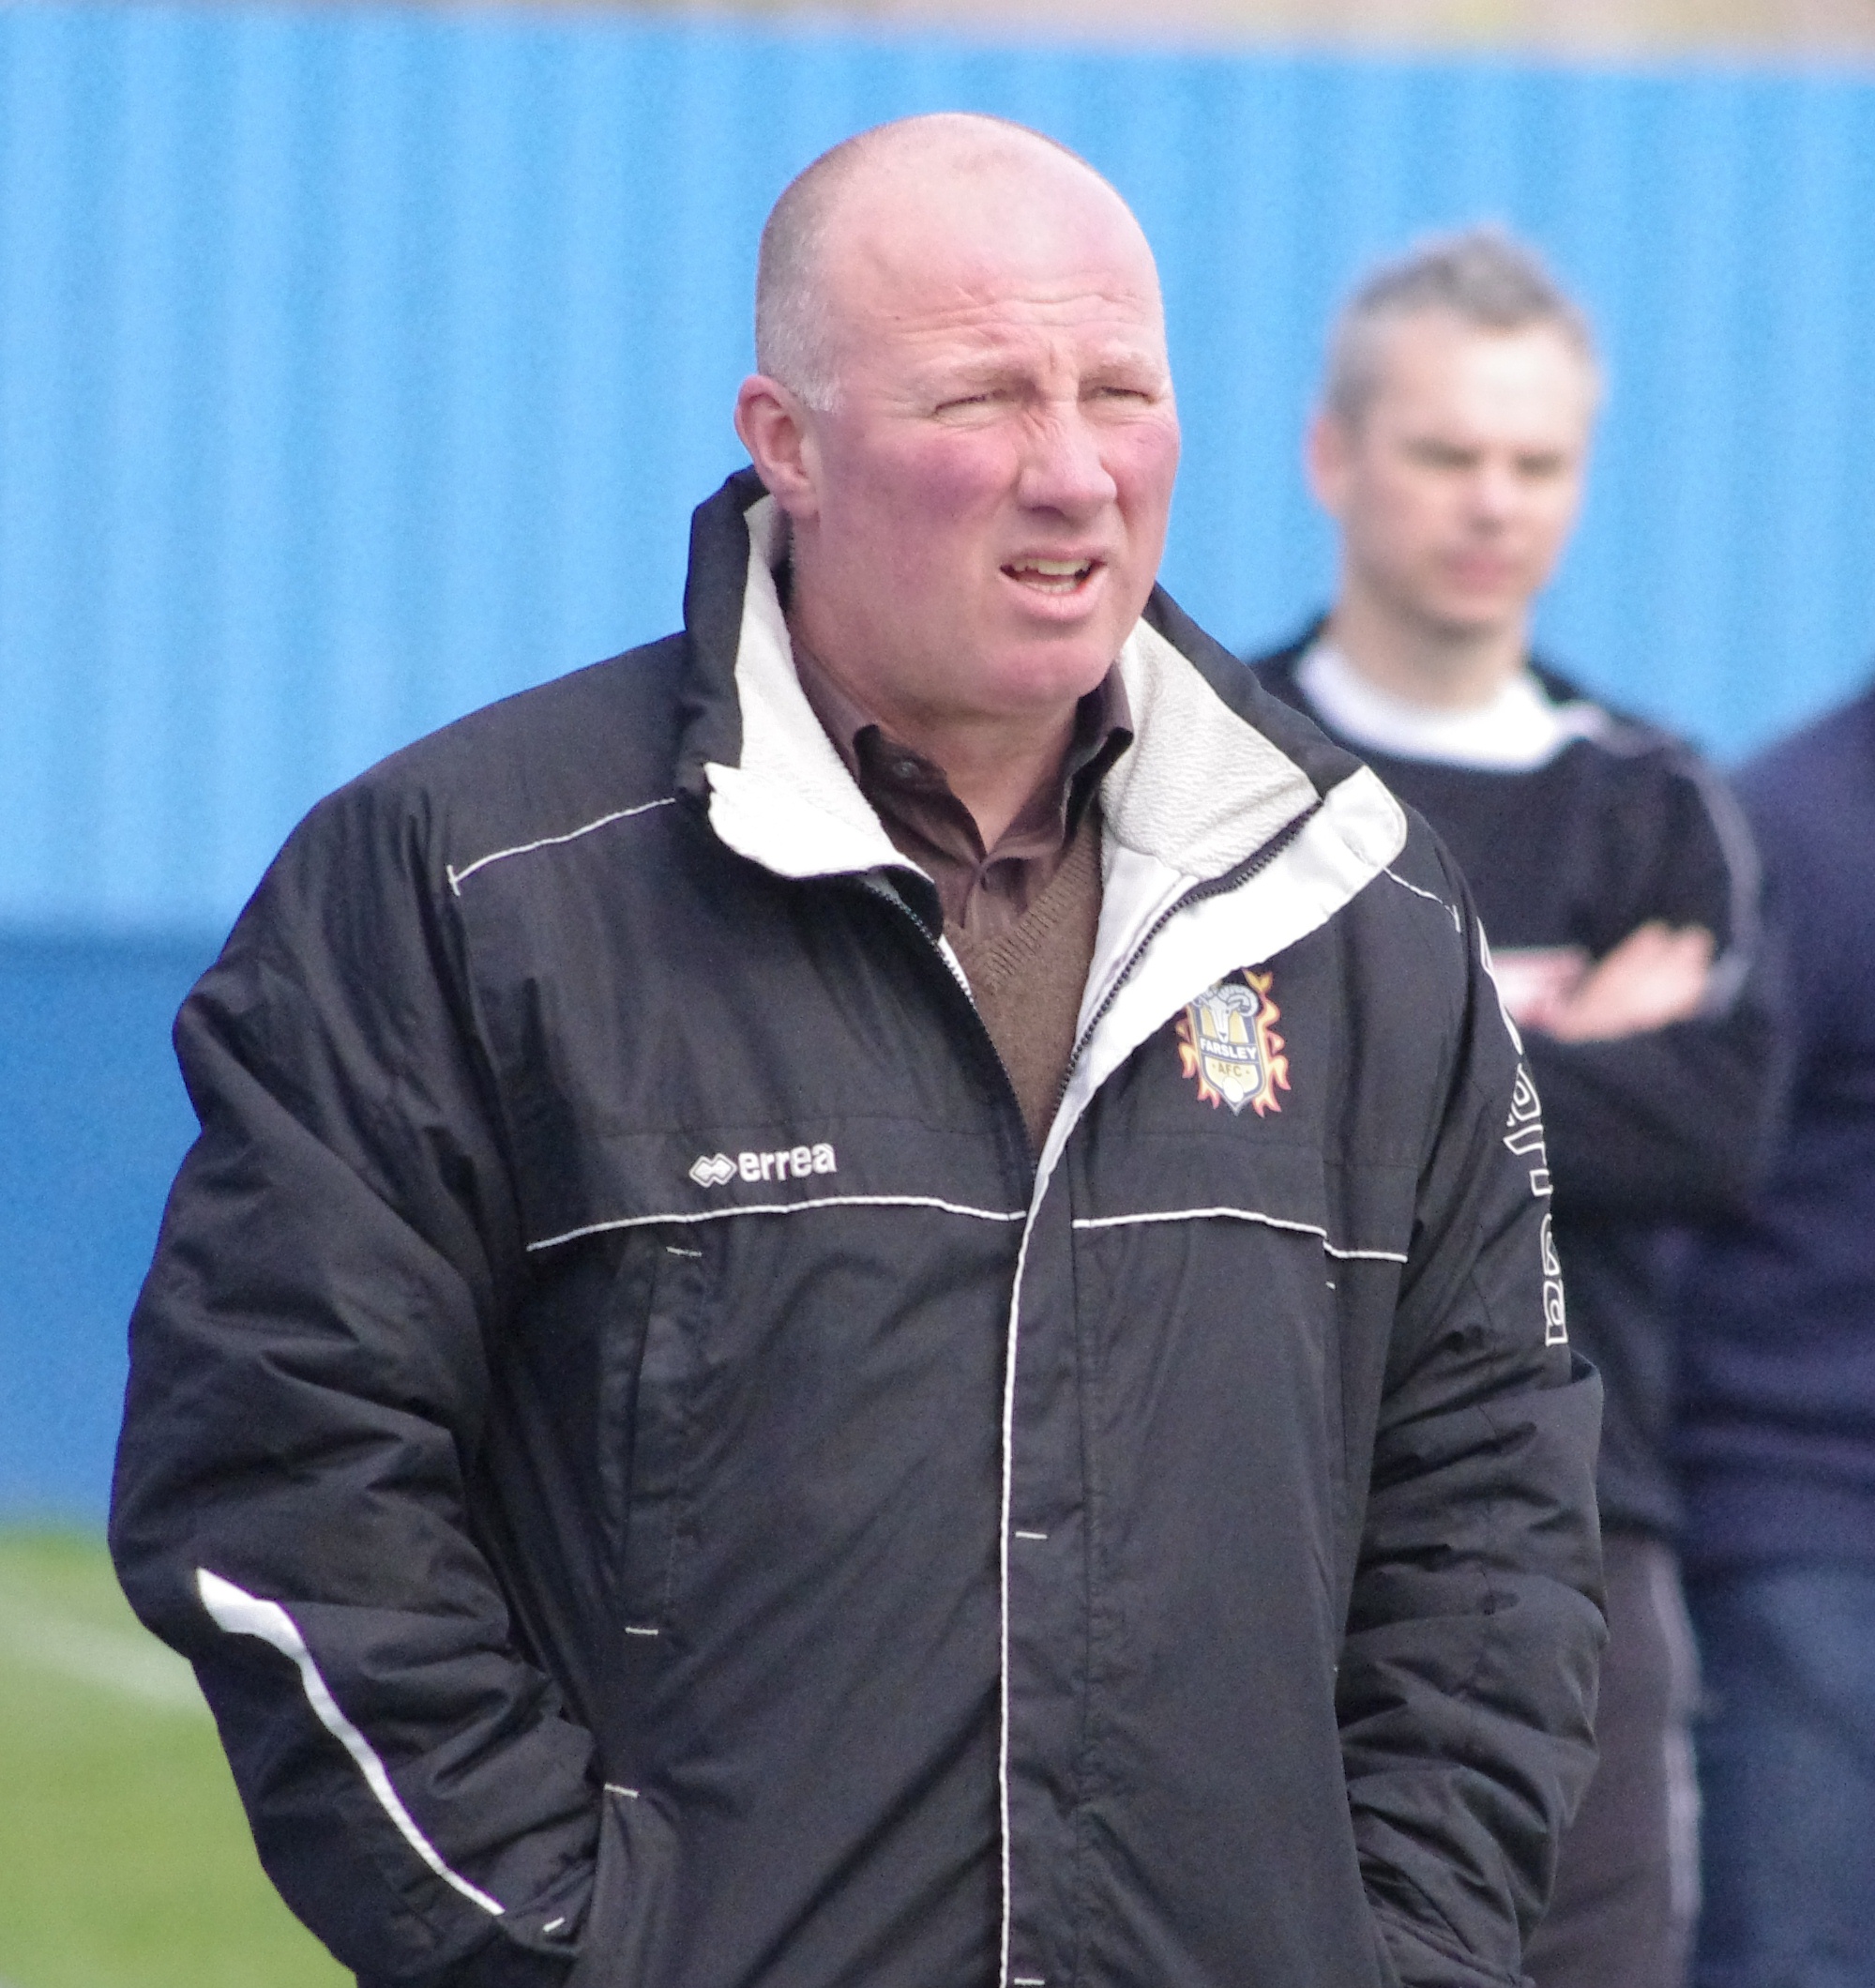 Farsley manager Neil Parsley is still waiting to hear from the FA about his complaint against a referee back in October